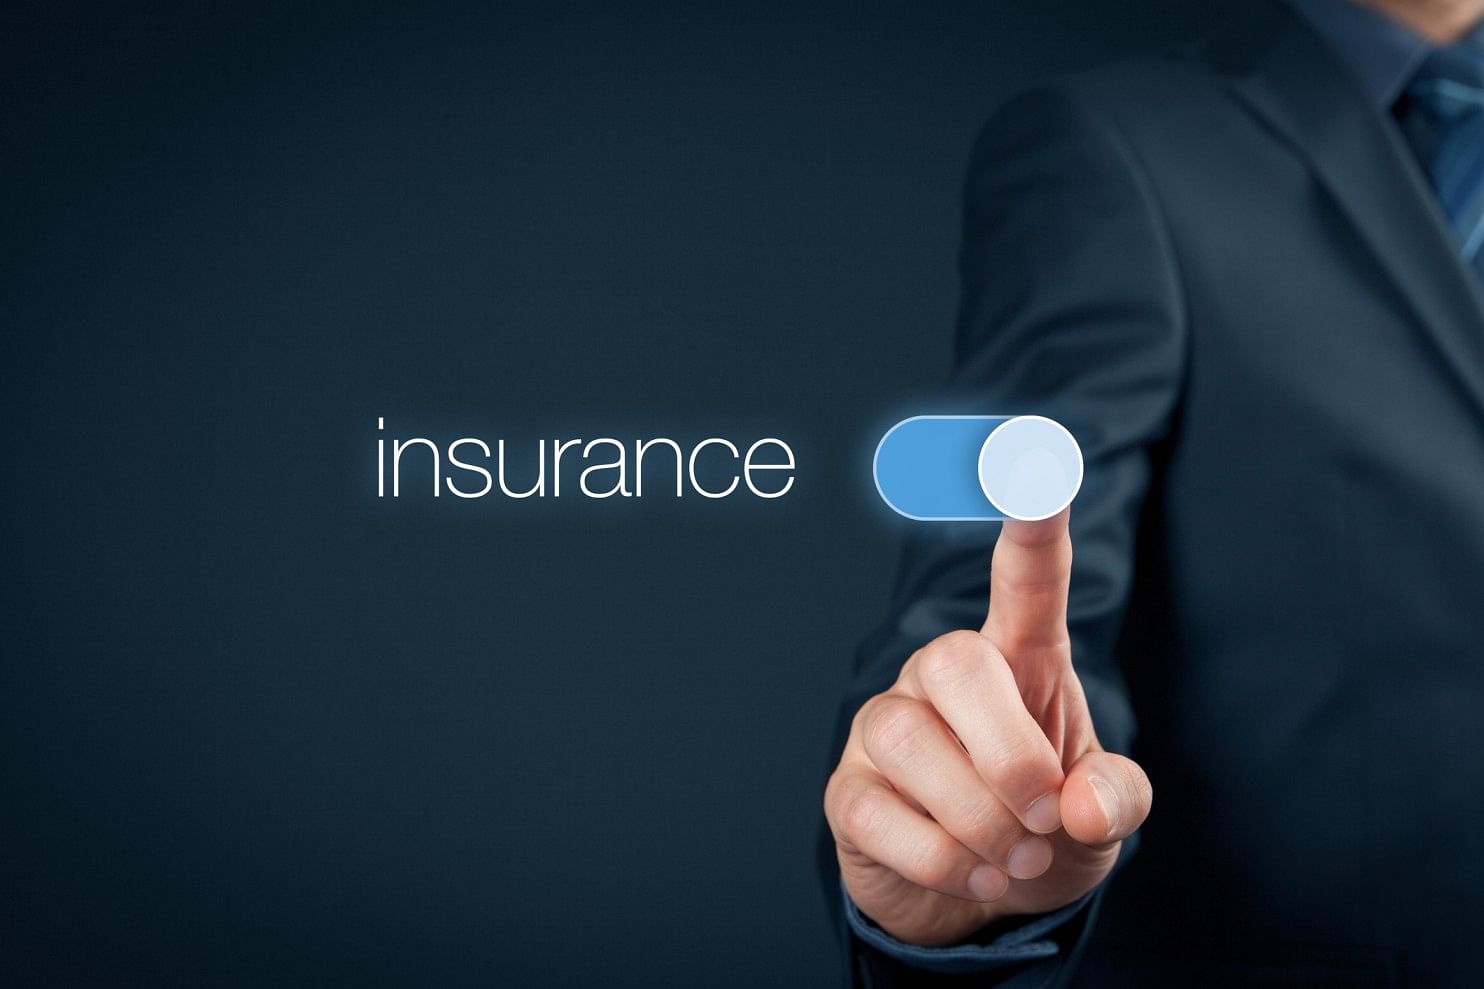 <div class="paragraphs"><p>Business Insurances offer a lot more coverage than regular insurances. Here's how to pick the best one for you:</p></div>